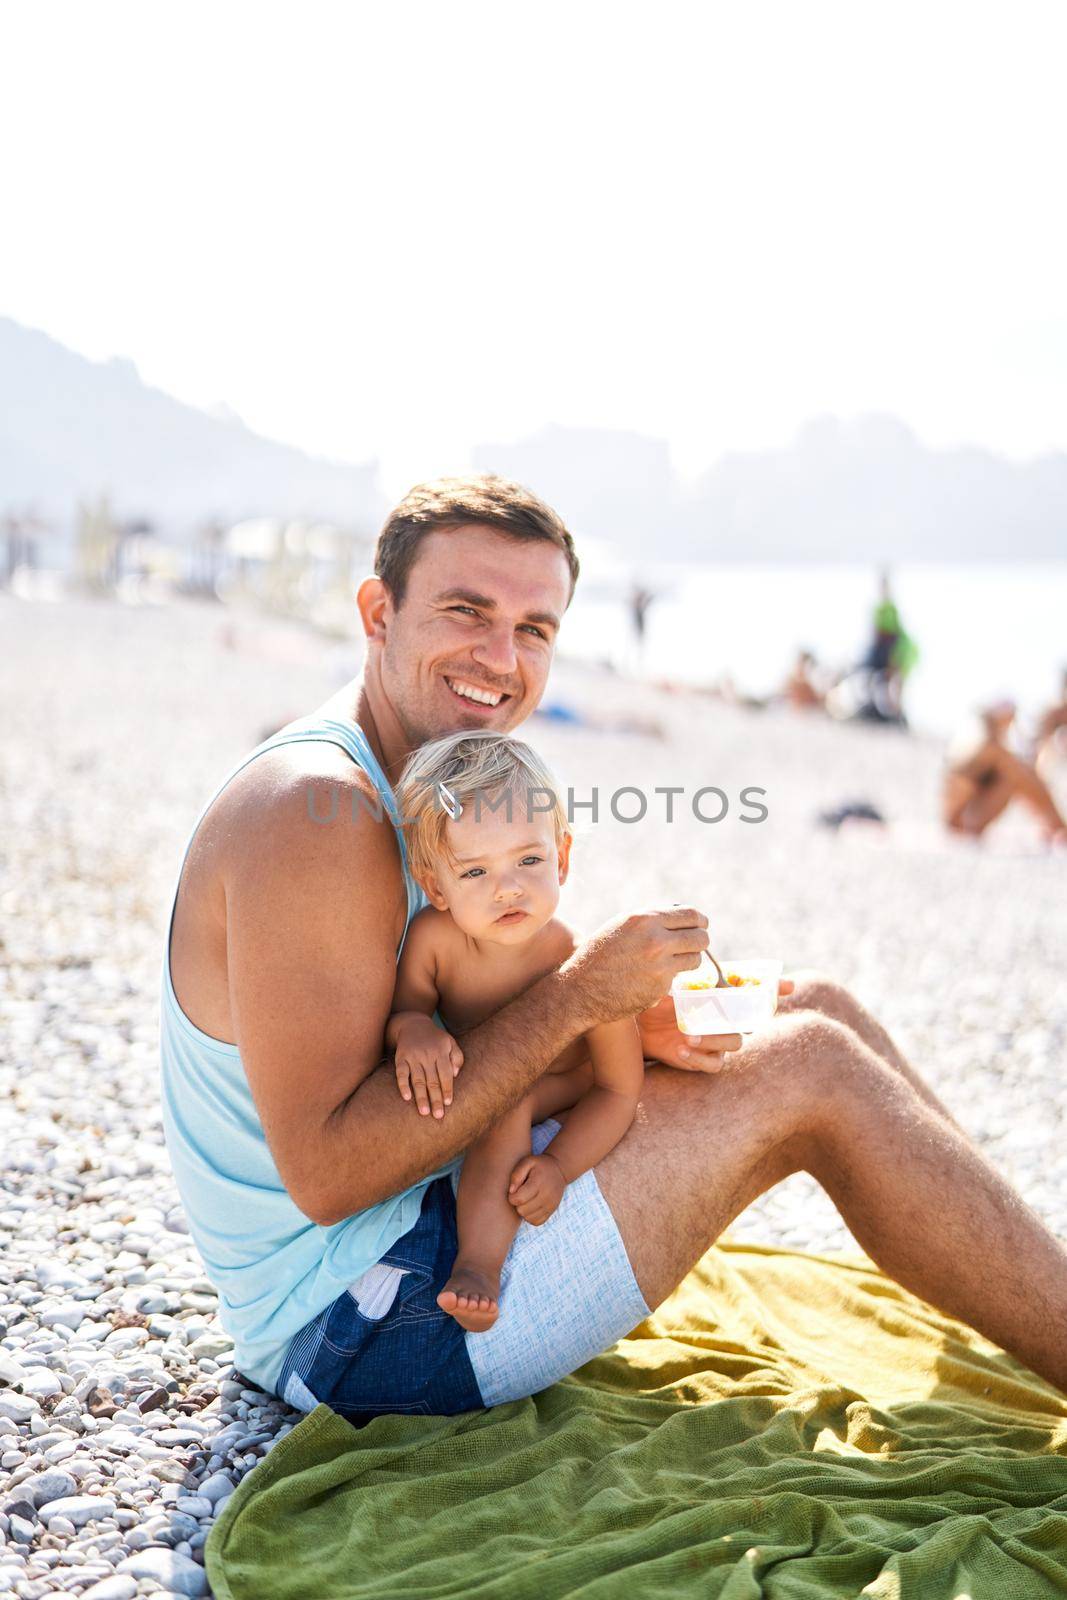 Smiling dad feeding his little daughter on the beach by Nadtochiy